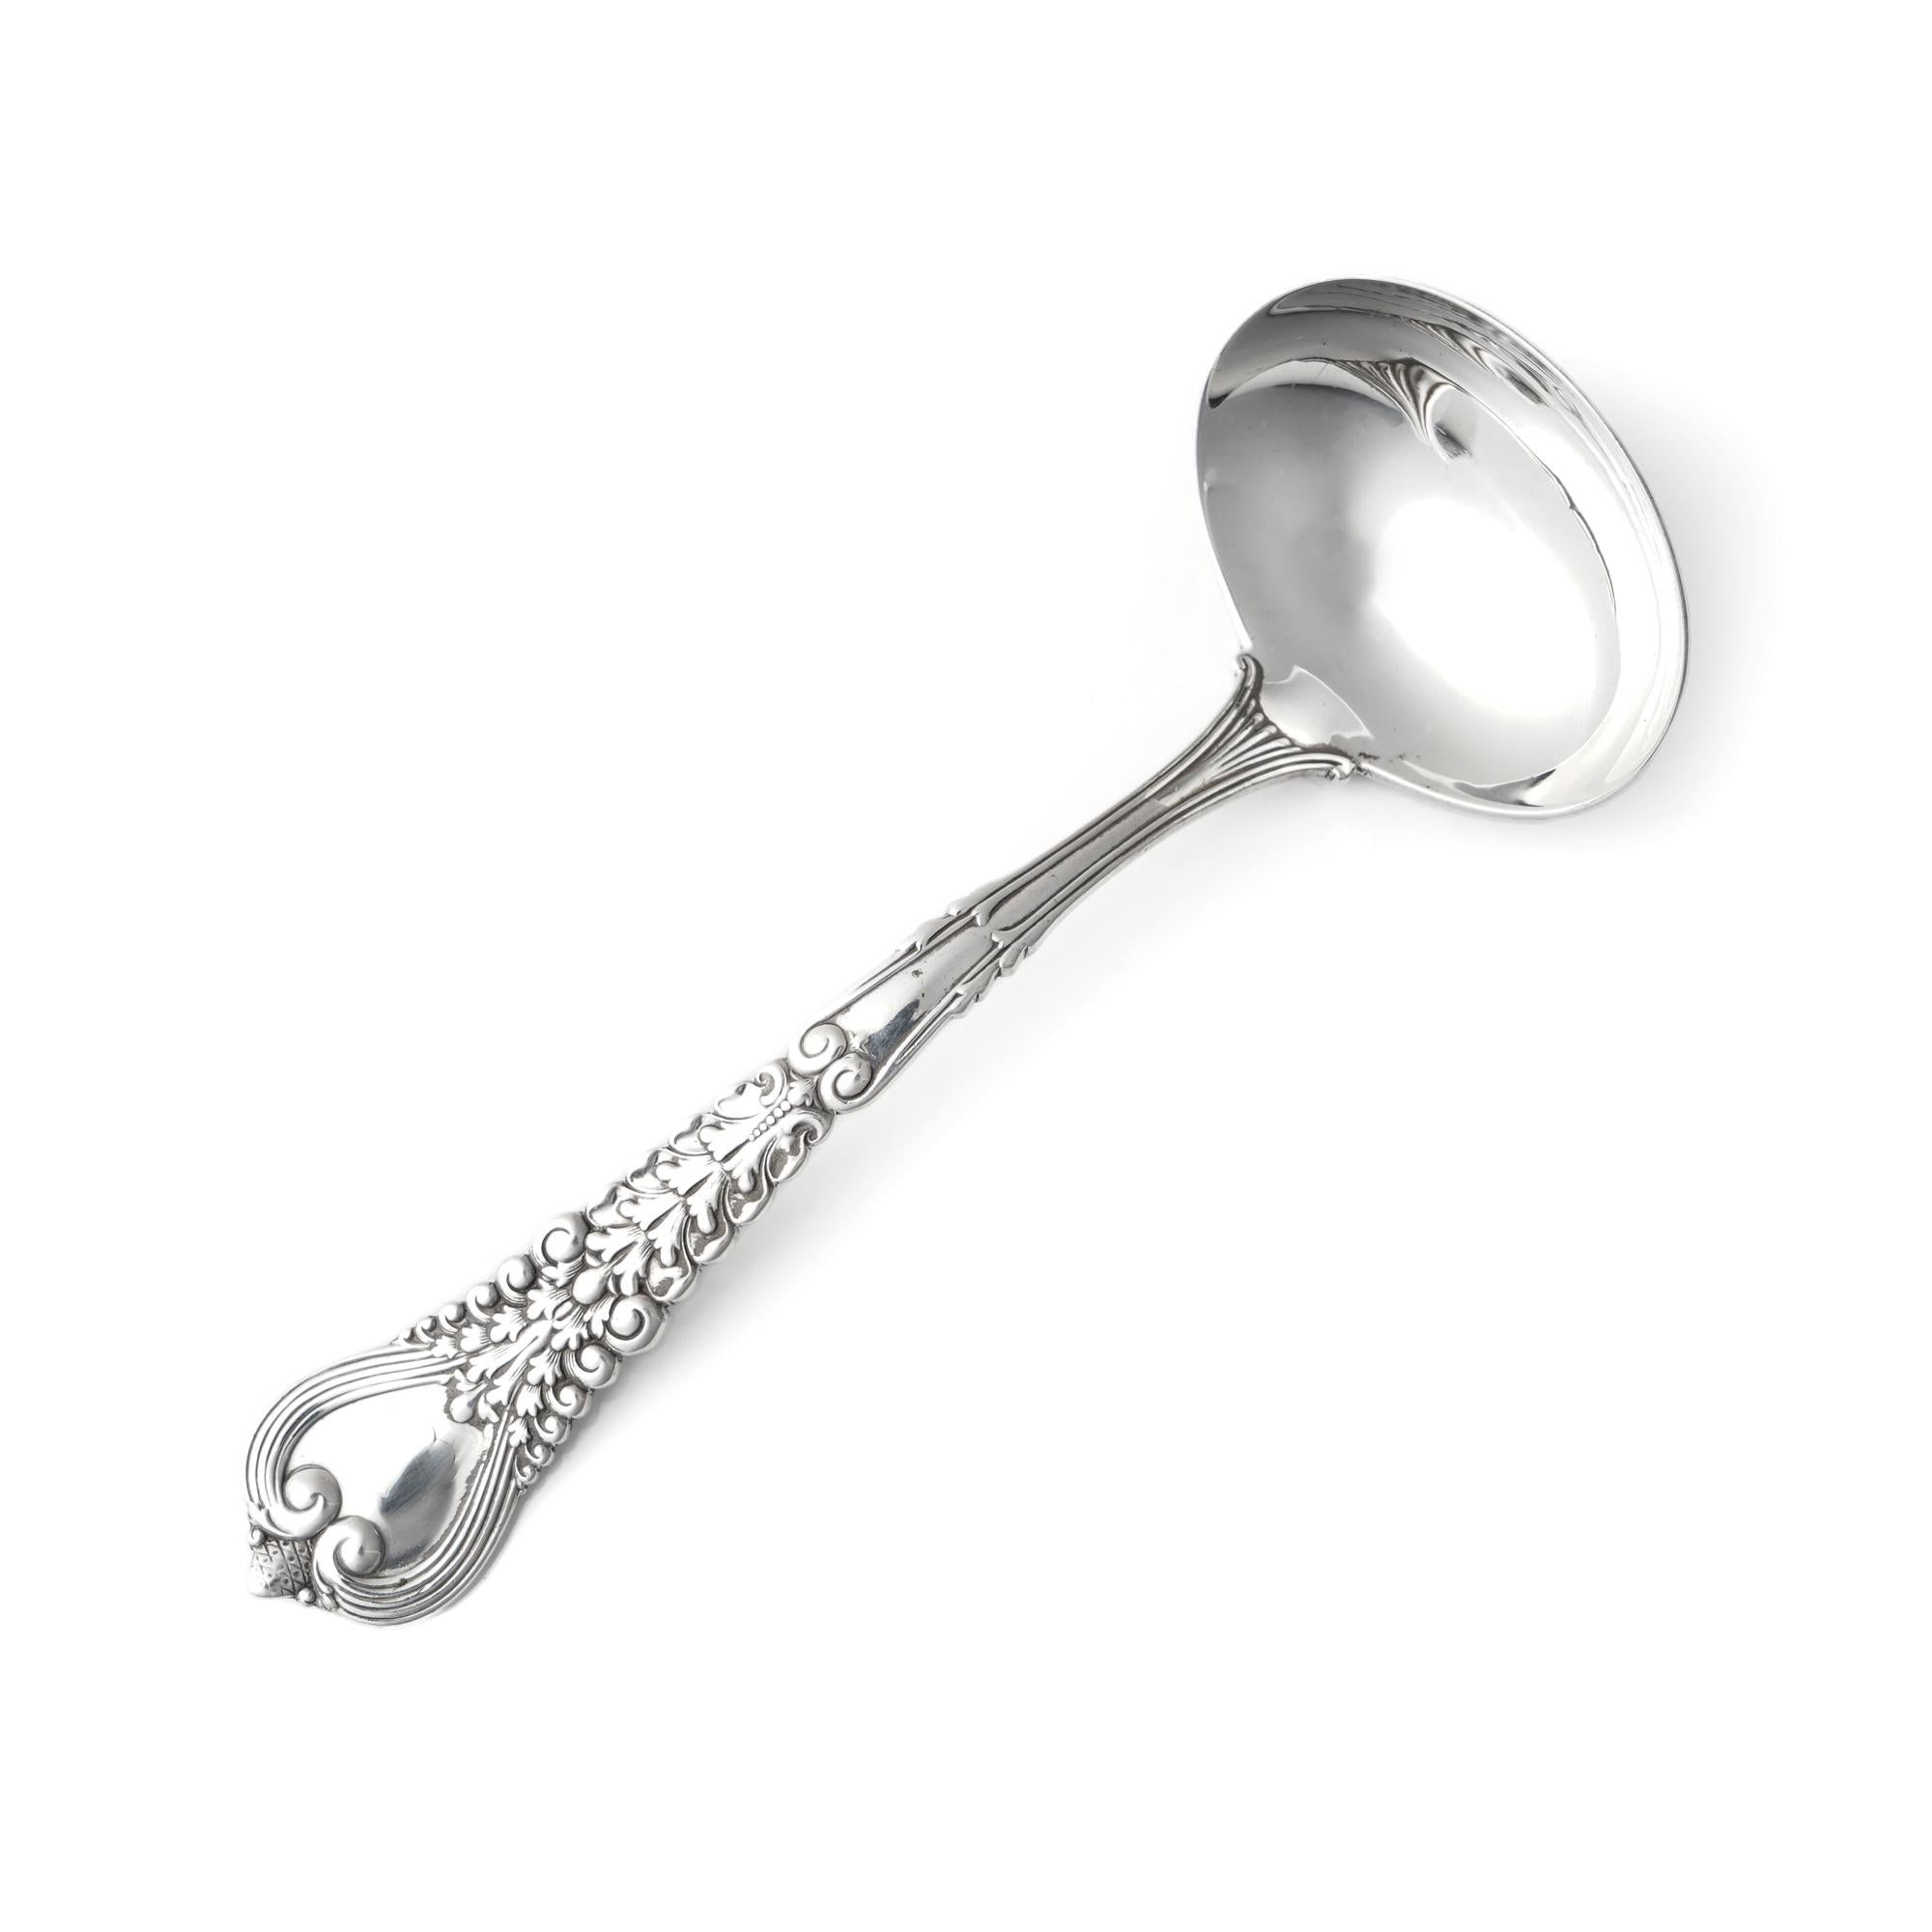 Antique Tiffany & Co. Sterling Silver Florentine Pattern Sauce Ladle In Good Condition For Sale In Braintree, GB